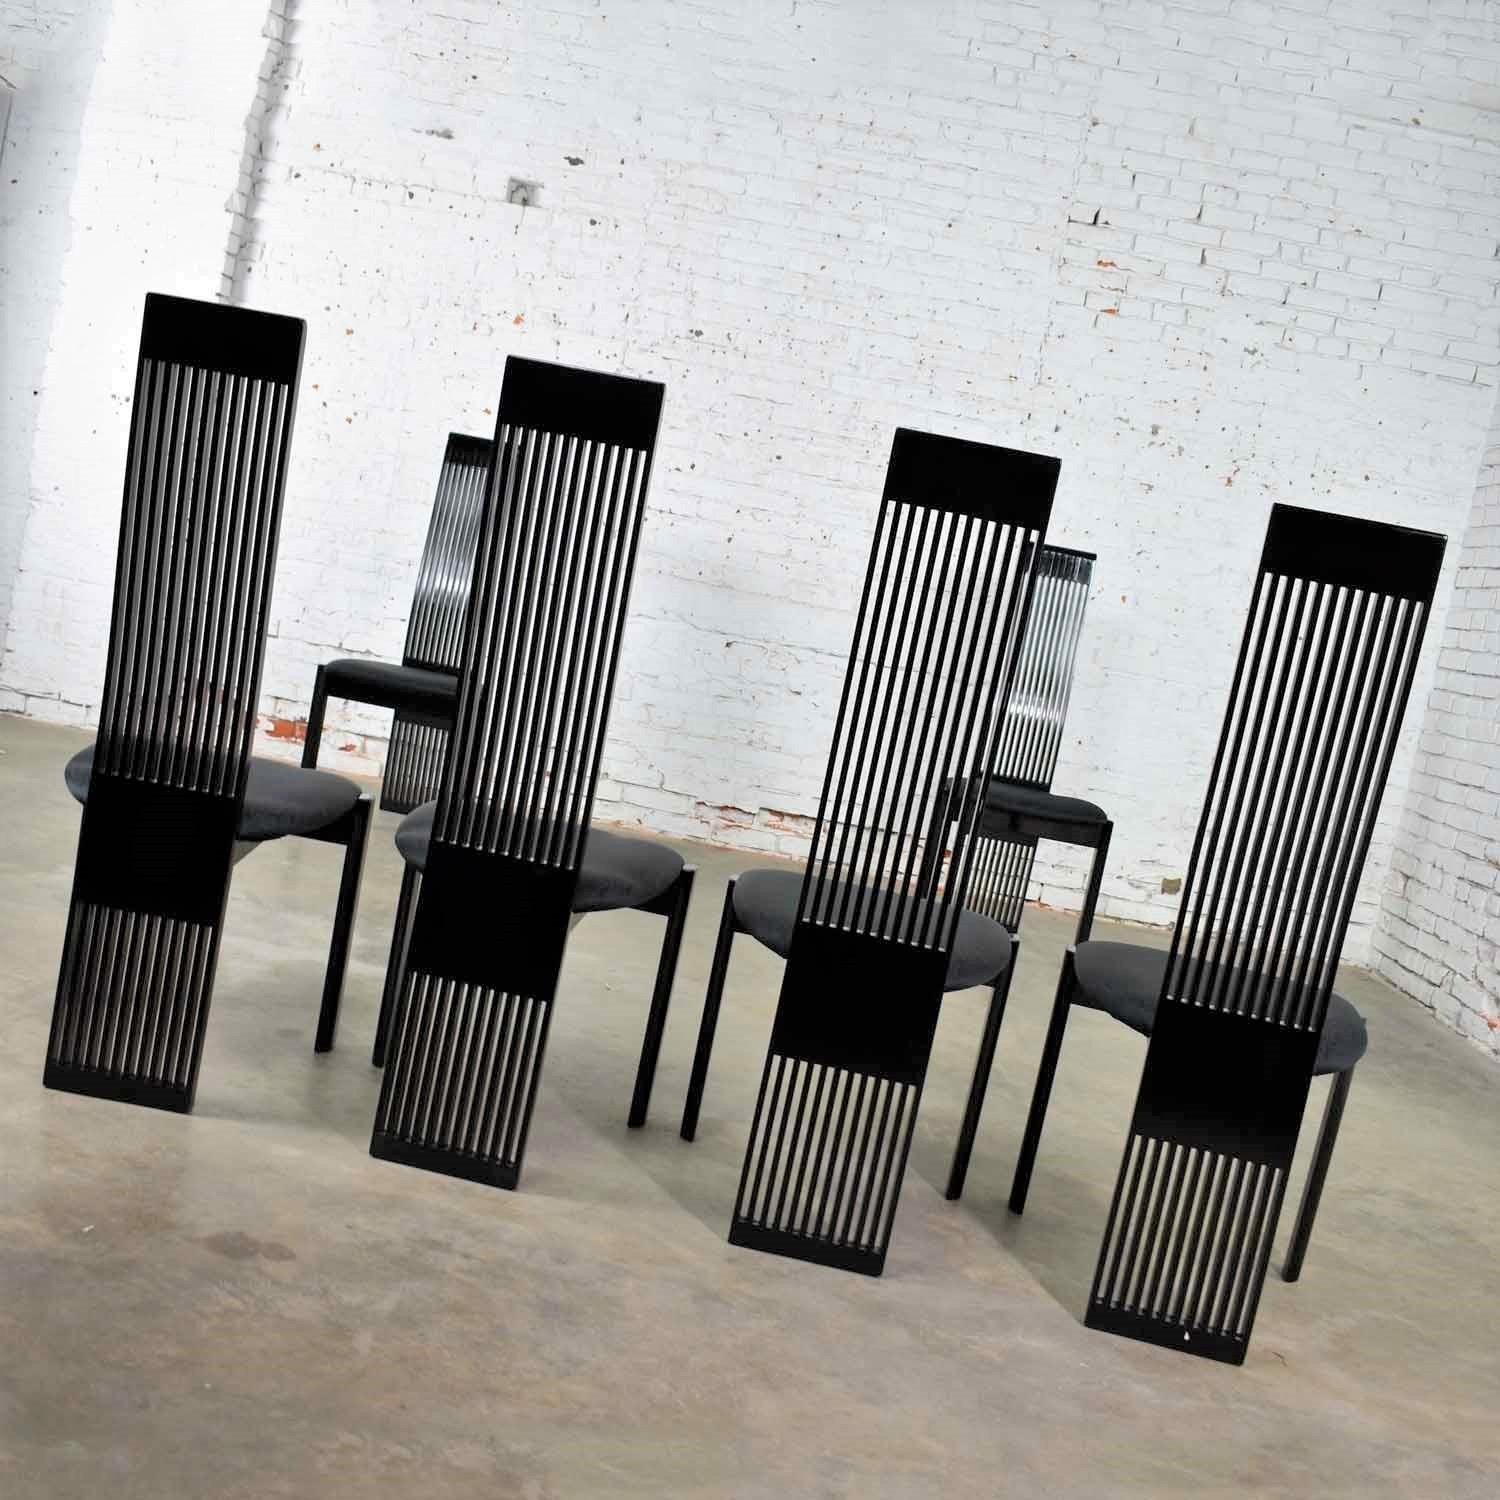 Italian Six Tripod Postmodern Black Lacquer Dining Chairs by Pietro Costantini Made in